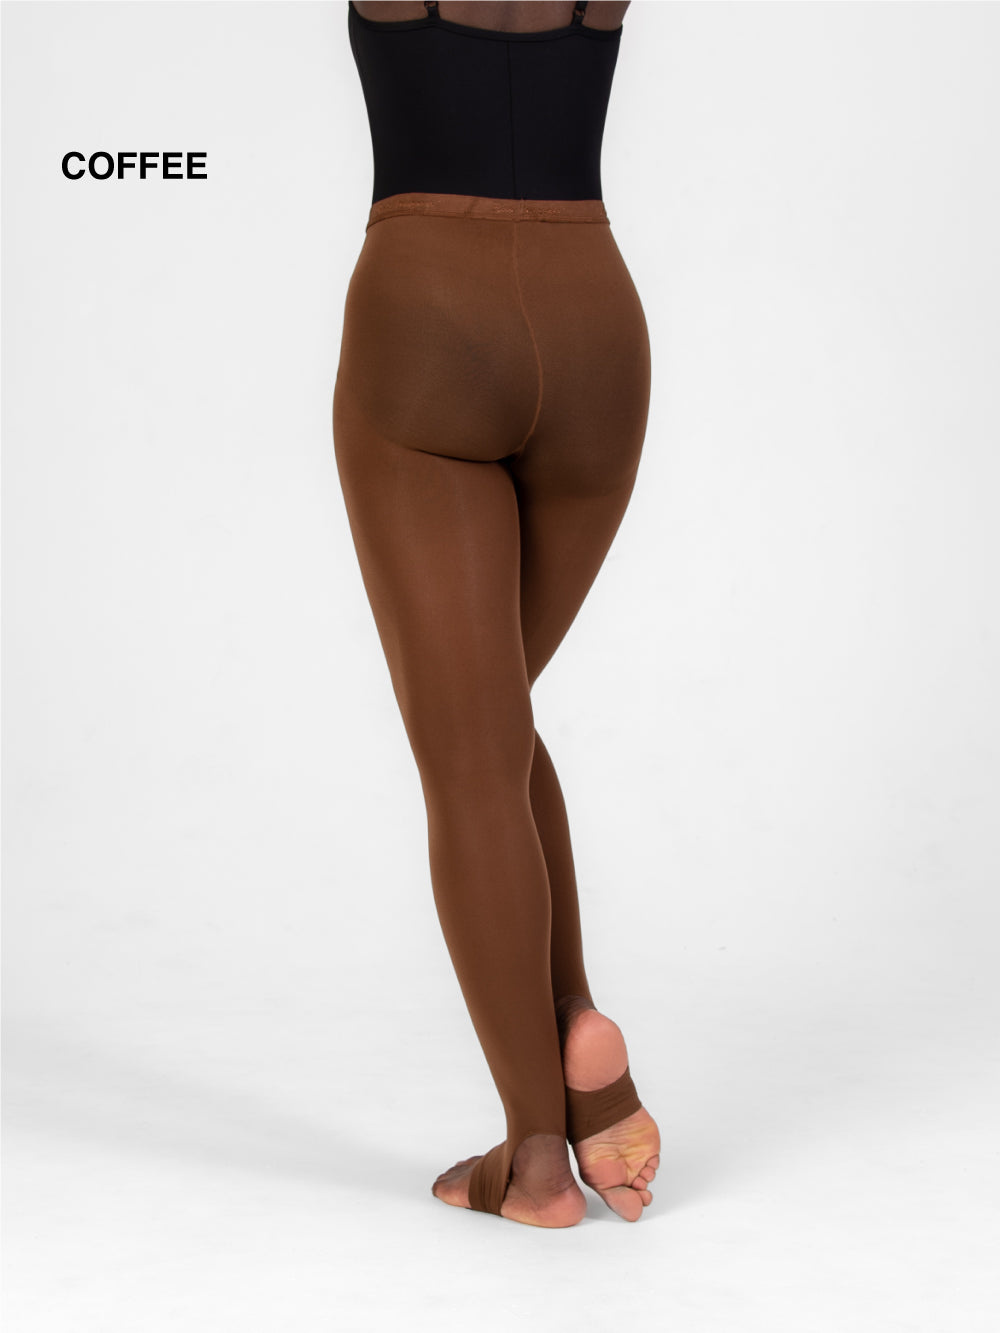 Body Wrappers - Stirrup Tights (adult) - Bellissimo